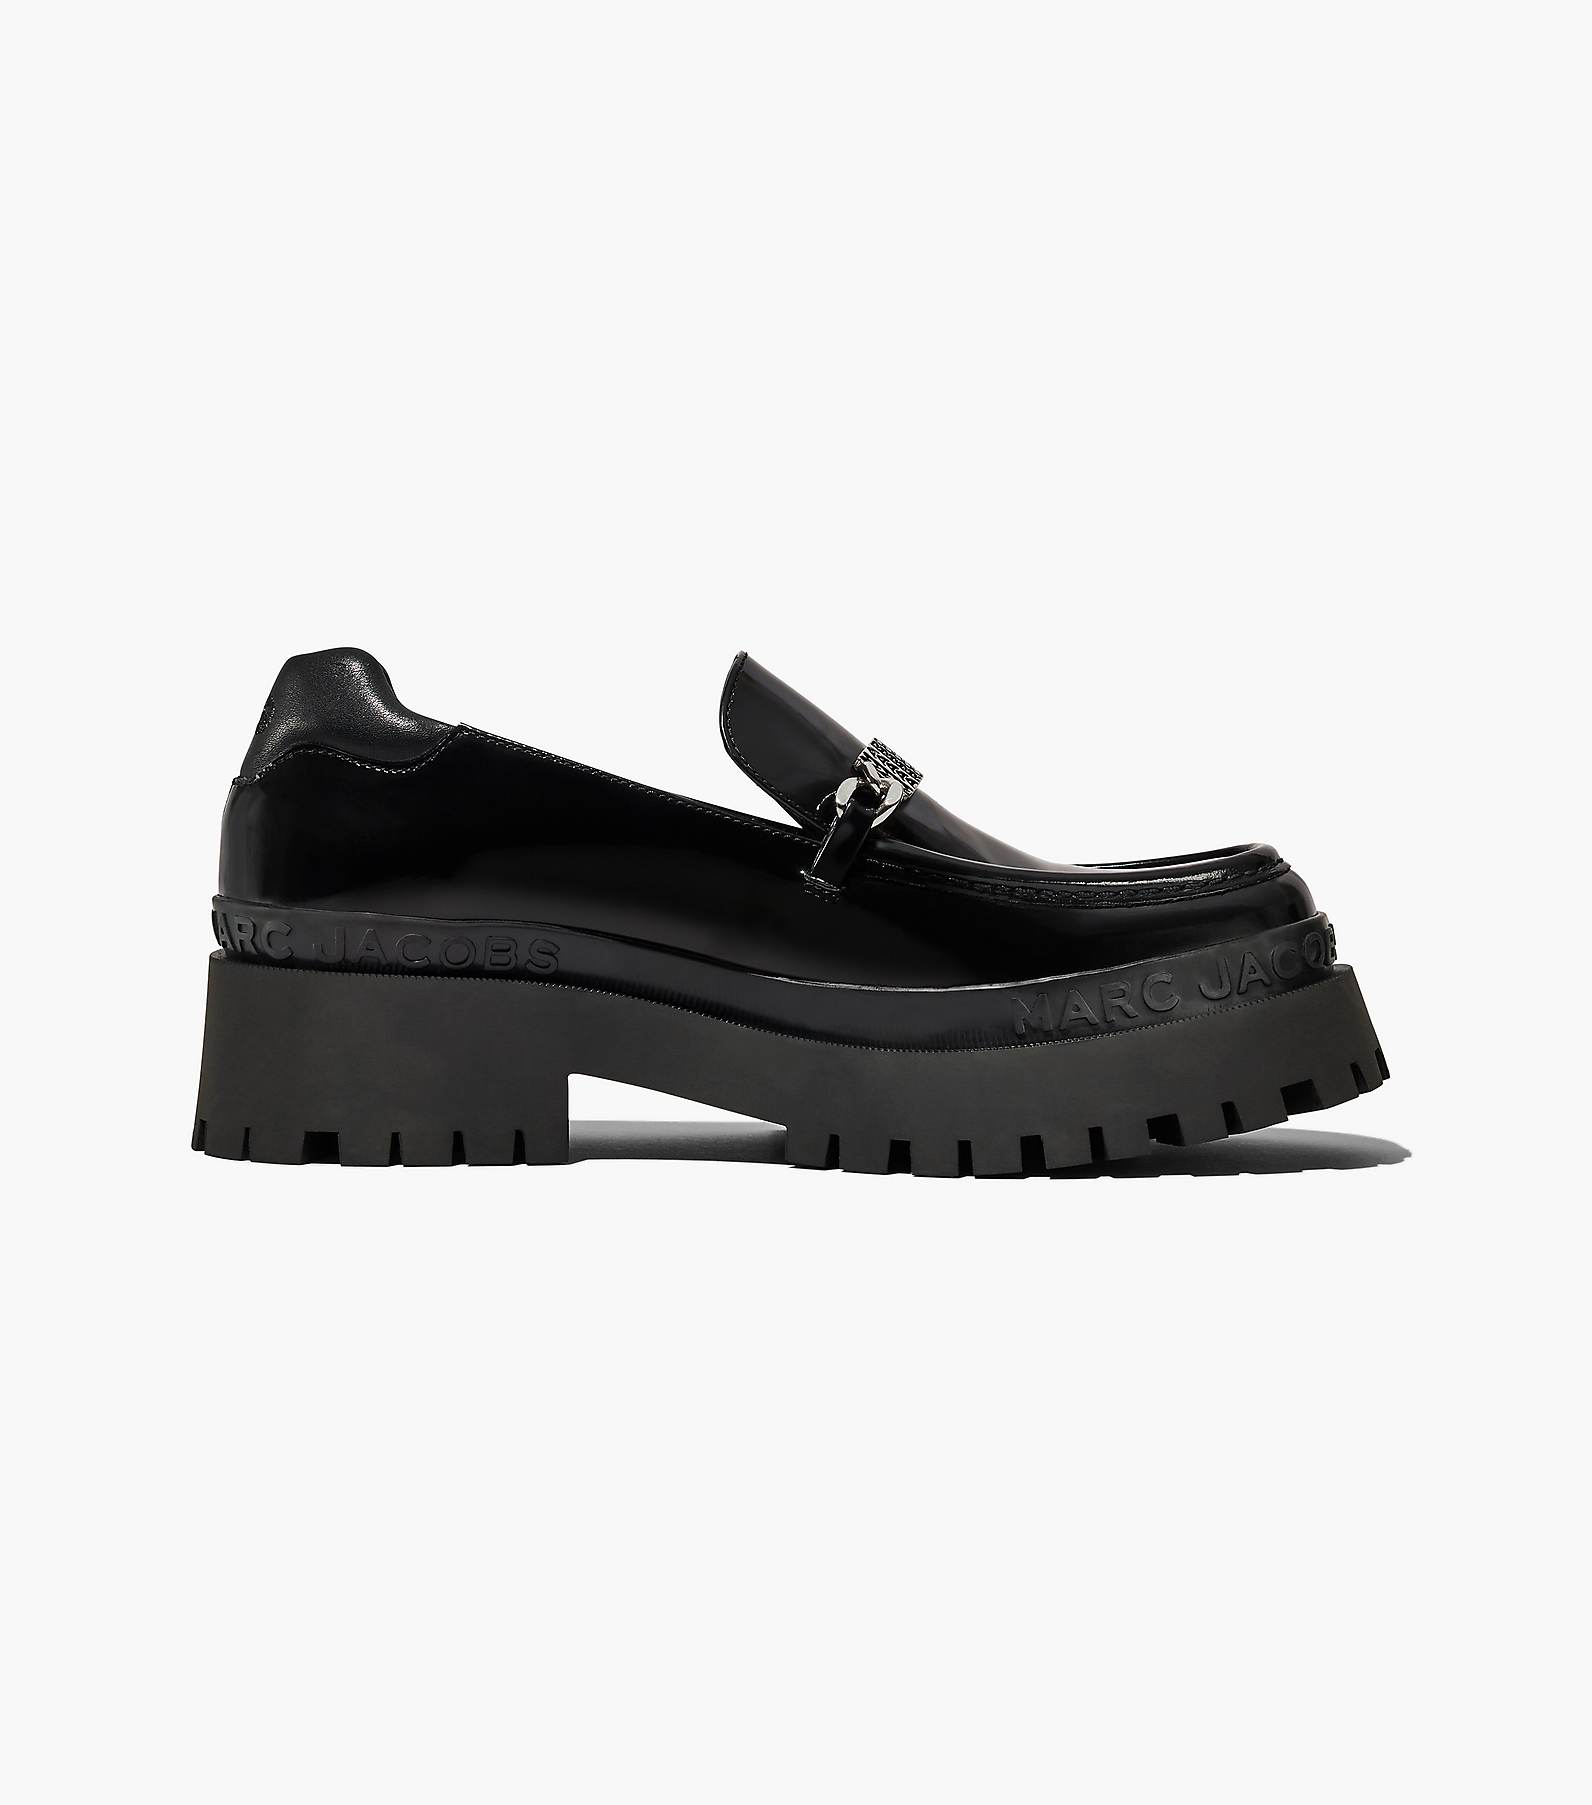 The Leather Barcode Monogram Loafer